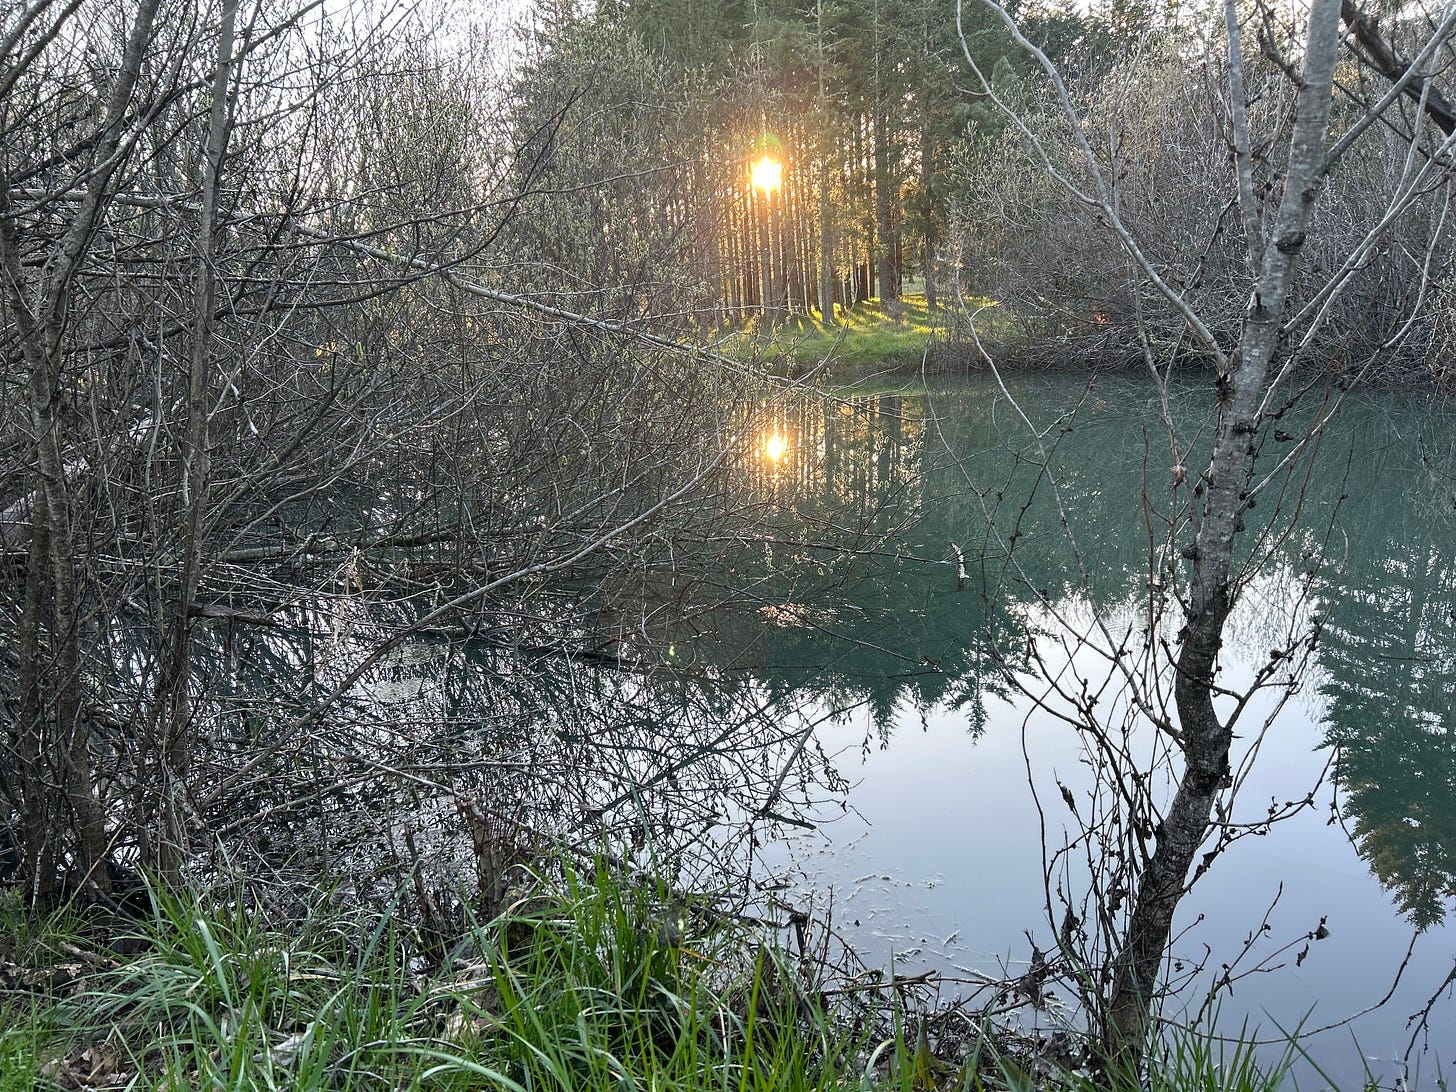 A pond with bare-limbed trees at its edges, the setting sun spilling through a ponderosa grove at the far end. If you look close, you can see tree frog egg masses on the surface.